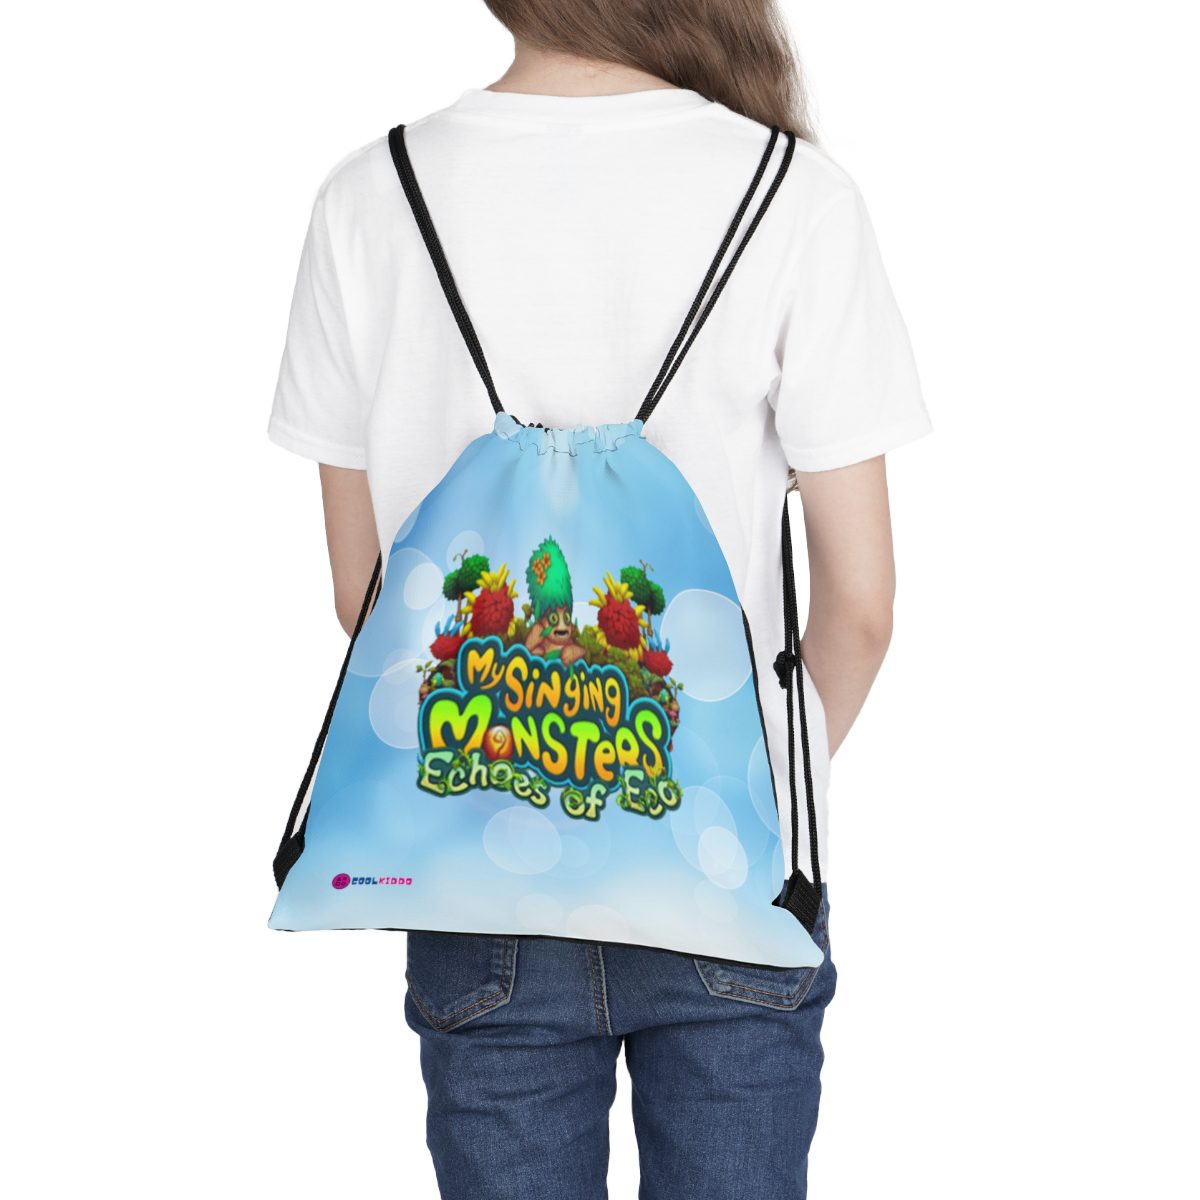 My Singing Monsters Echoes of Eco Blue and Green Drawstring Bag Cool Kiddo 16